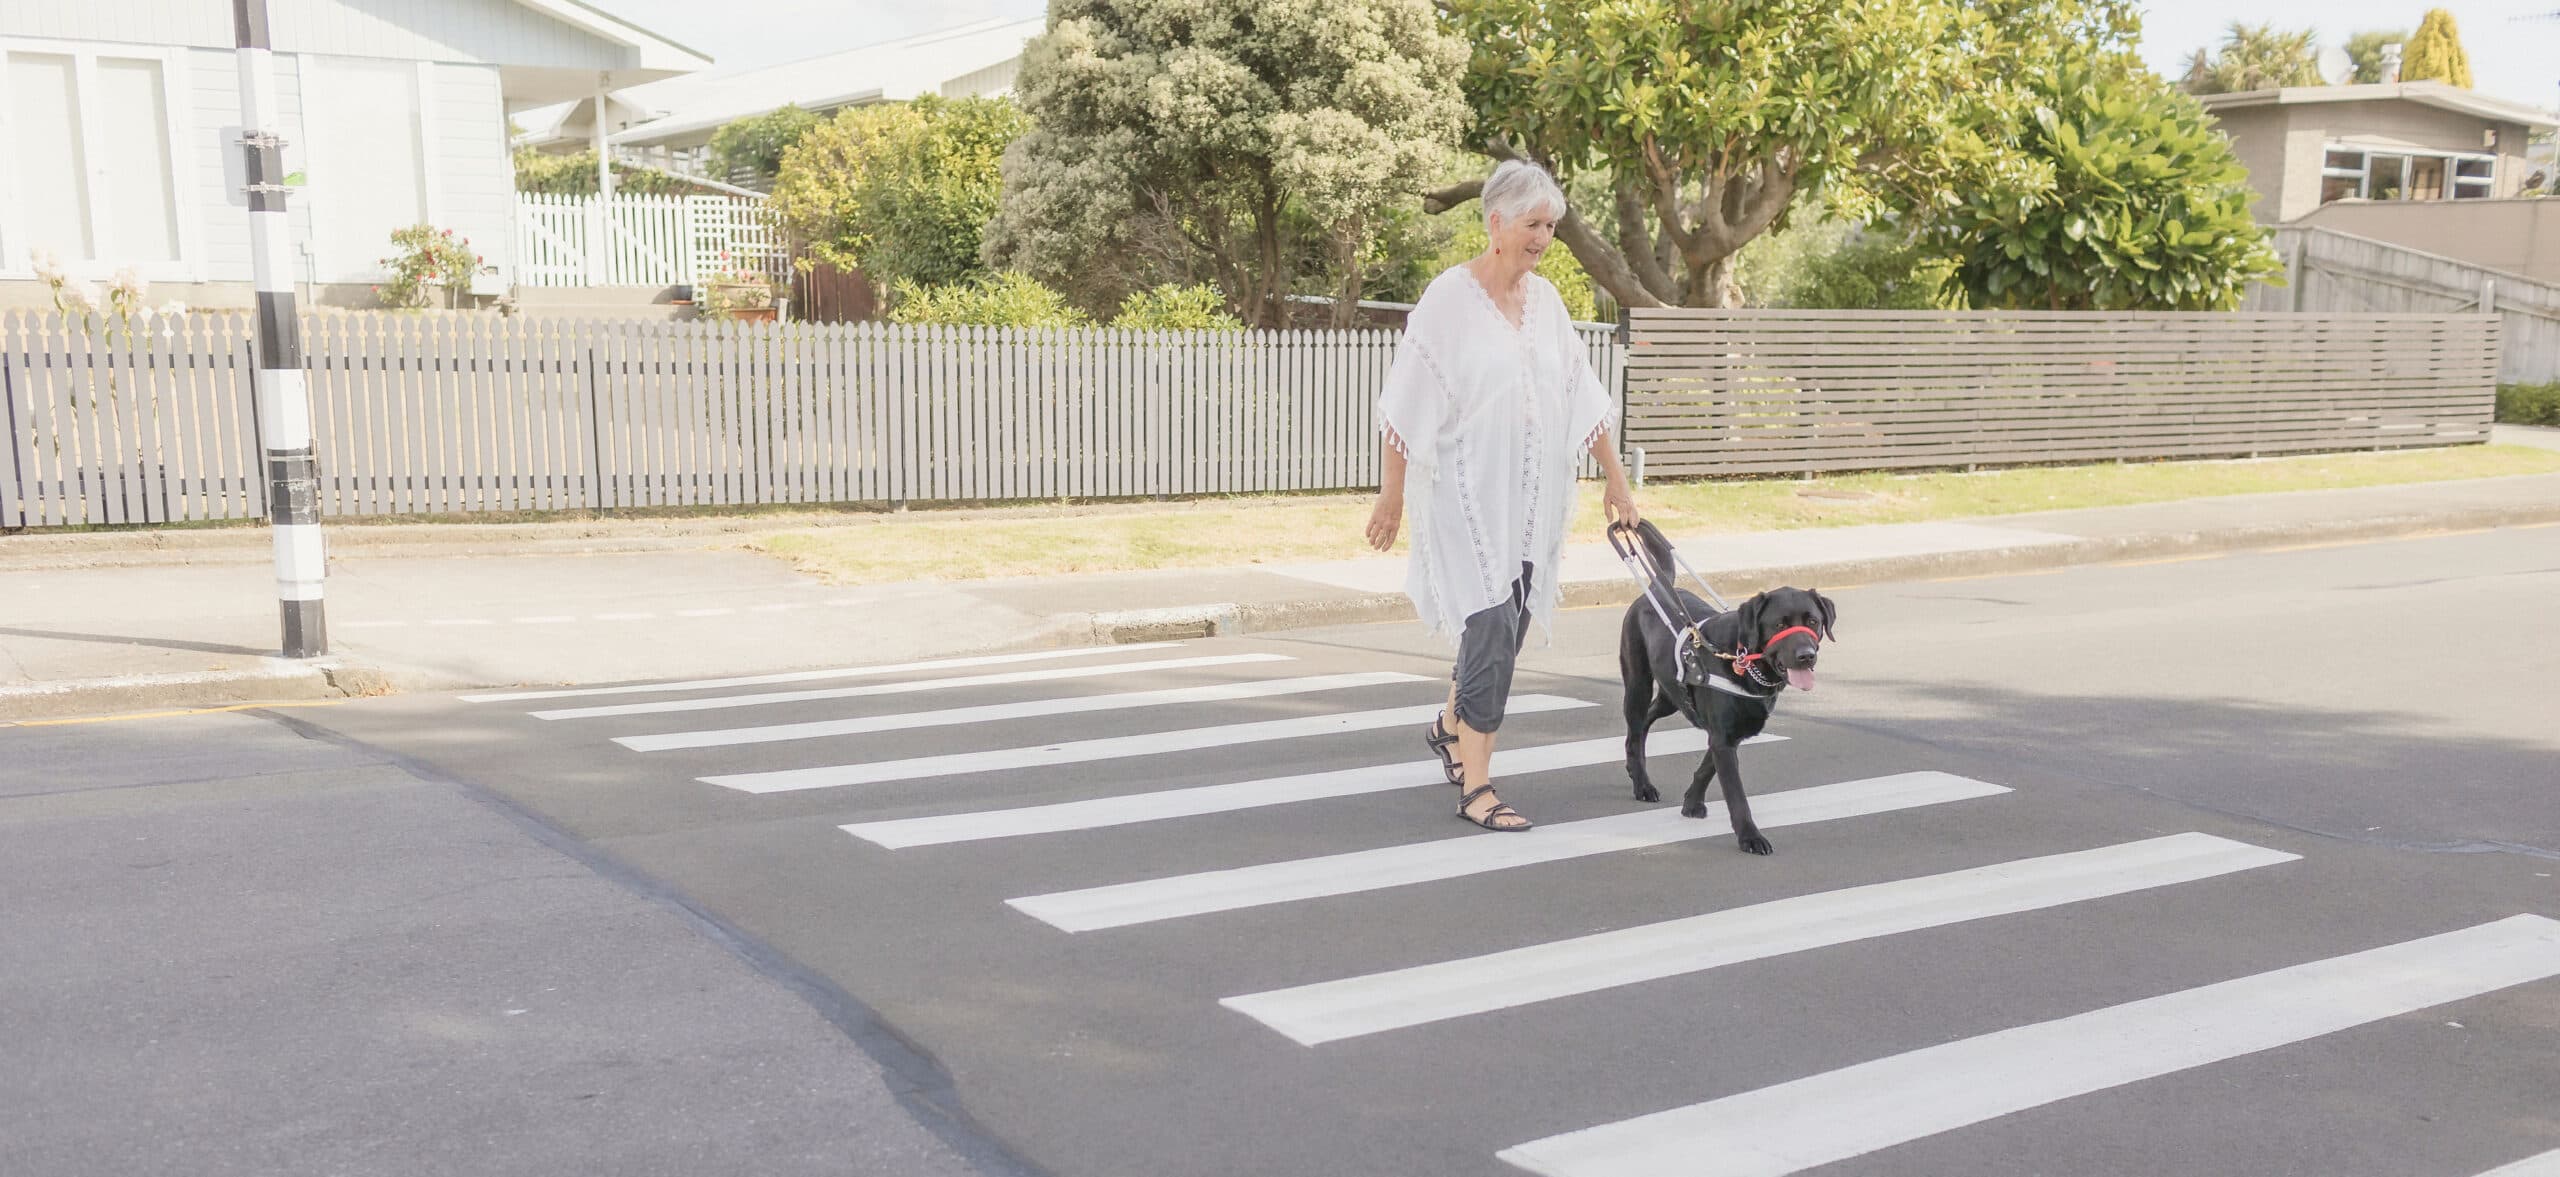 Client Sue and her guide dog, Yazz walk across a pedestrian crossing